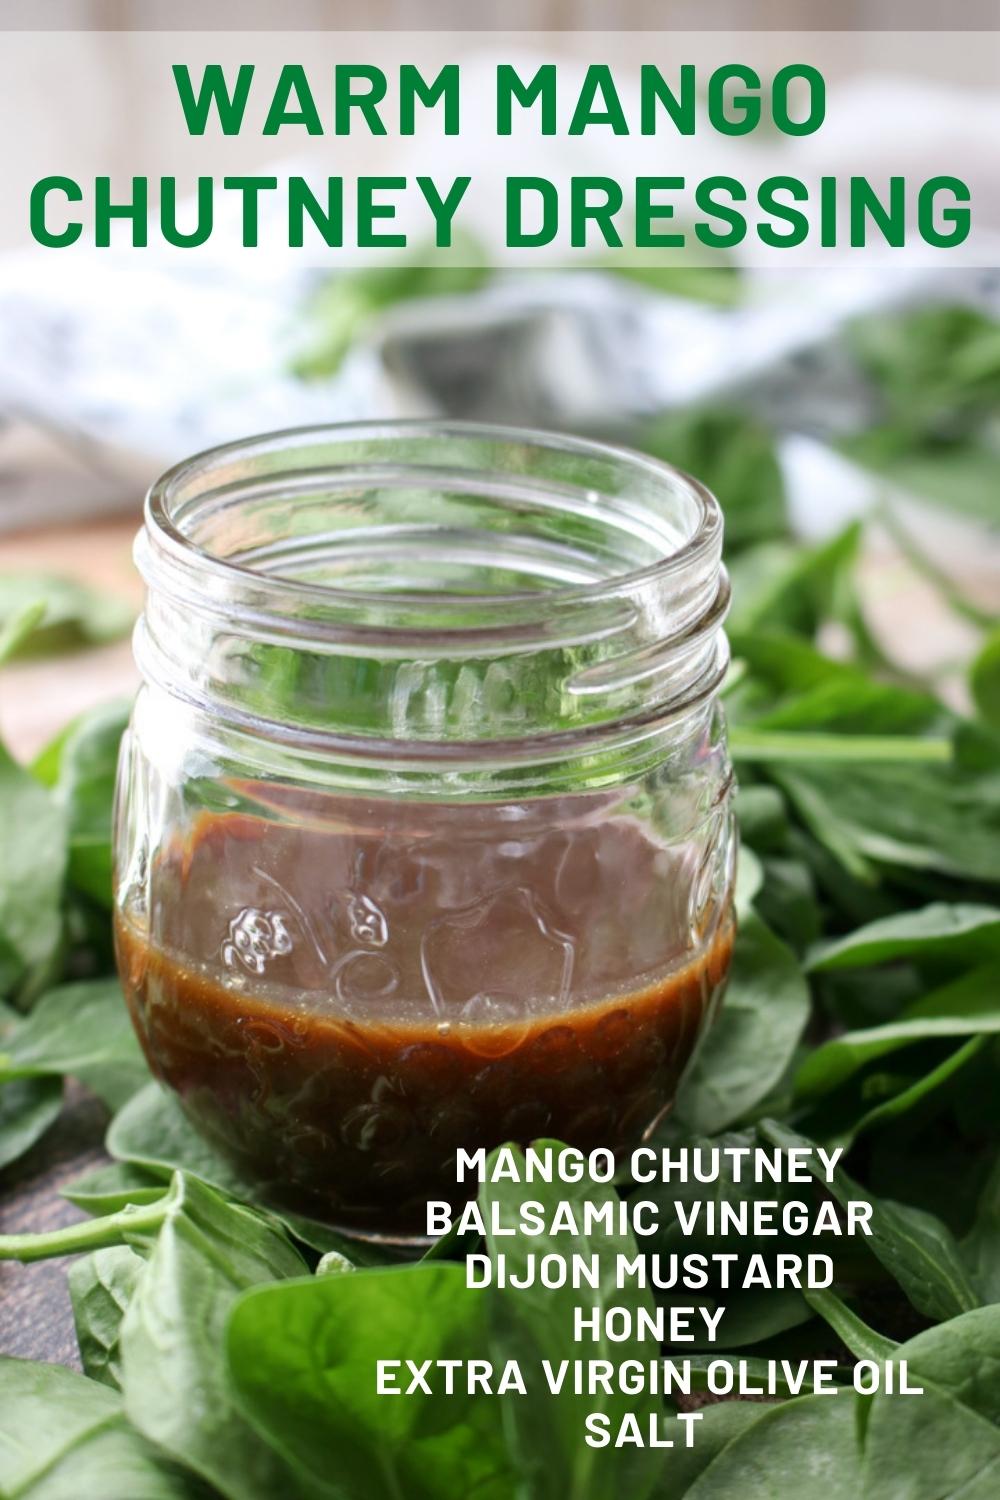 Tangy sweet bold homemade salad dressing made with warm mango chutney is our new favorite way to dress a spinach salad. via @krazykitchenmom